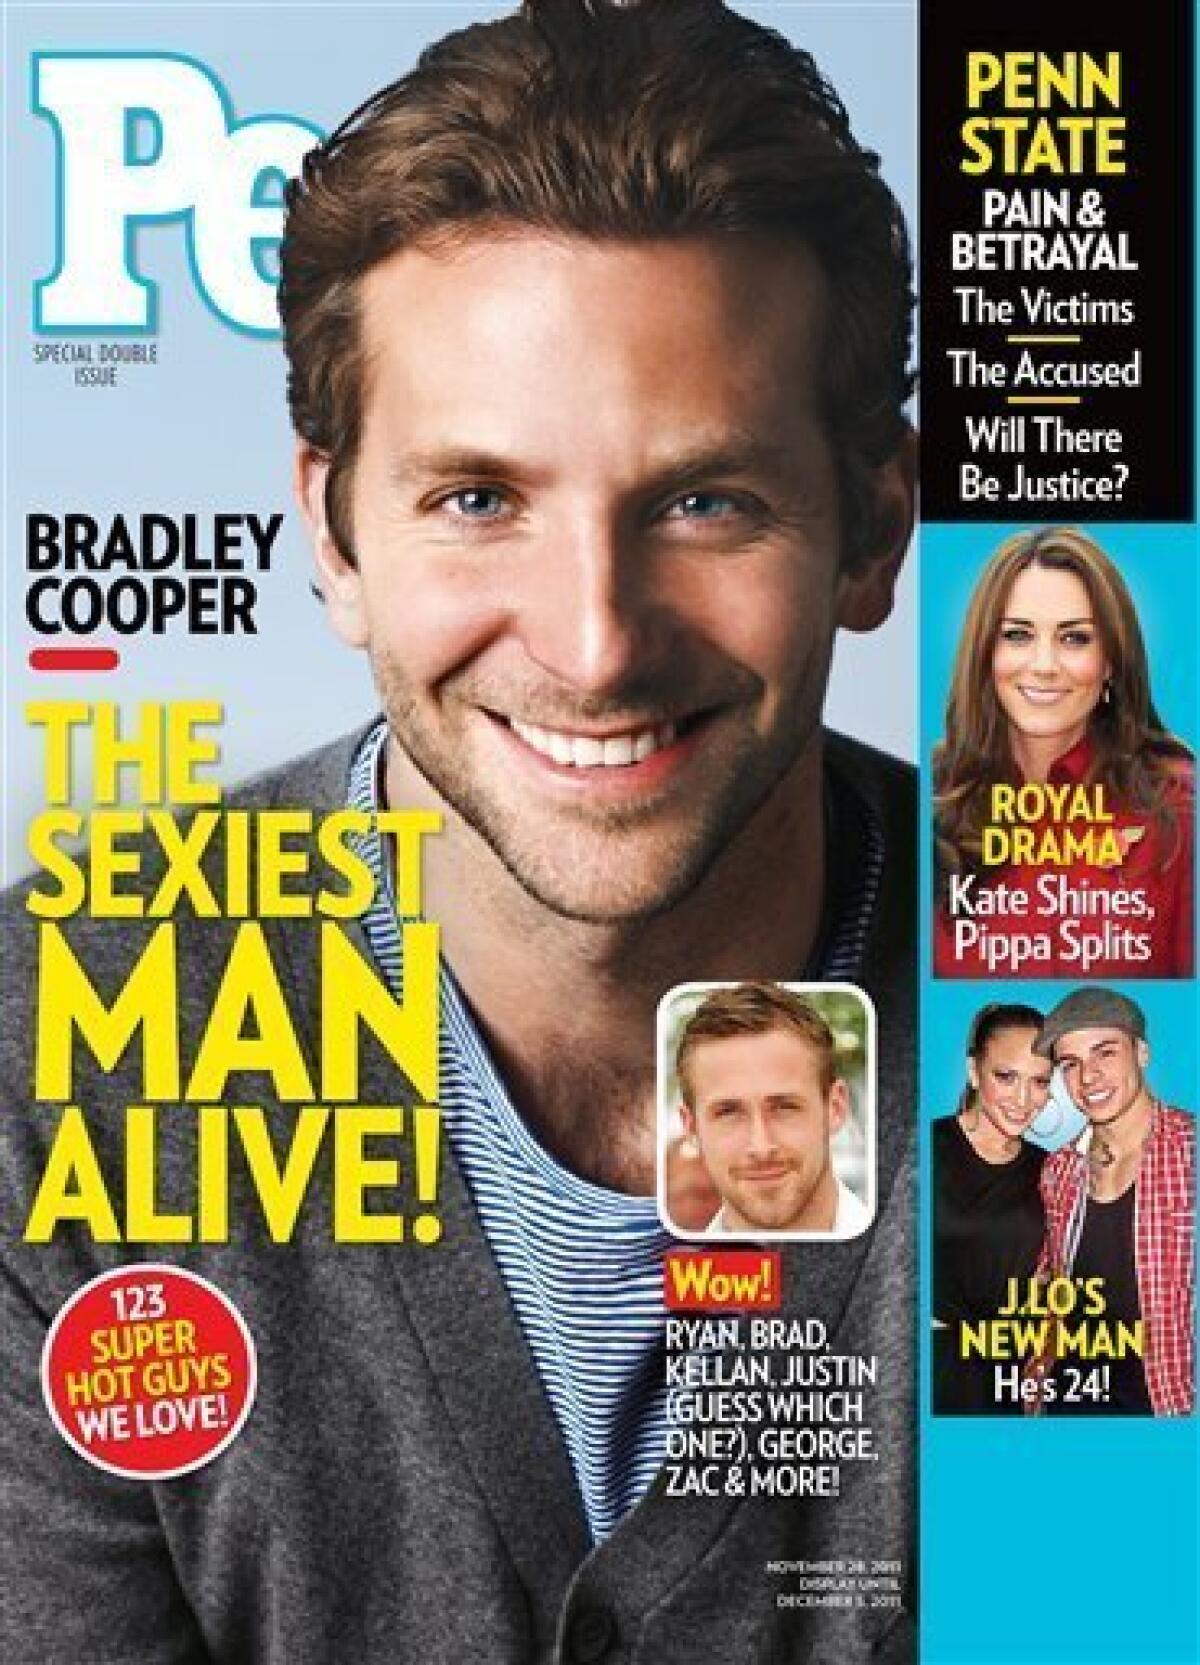 Every Guy Who Has Been on the Cover of People's Sexiest Man Alive